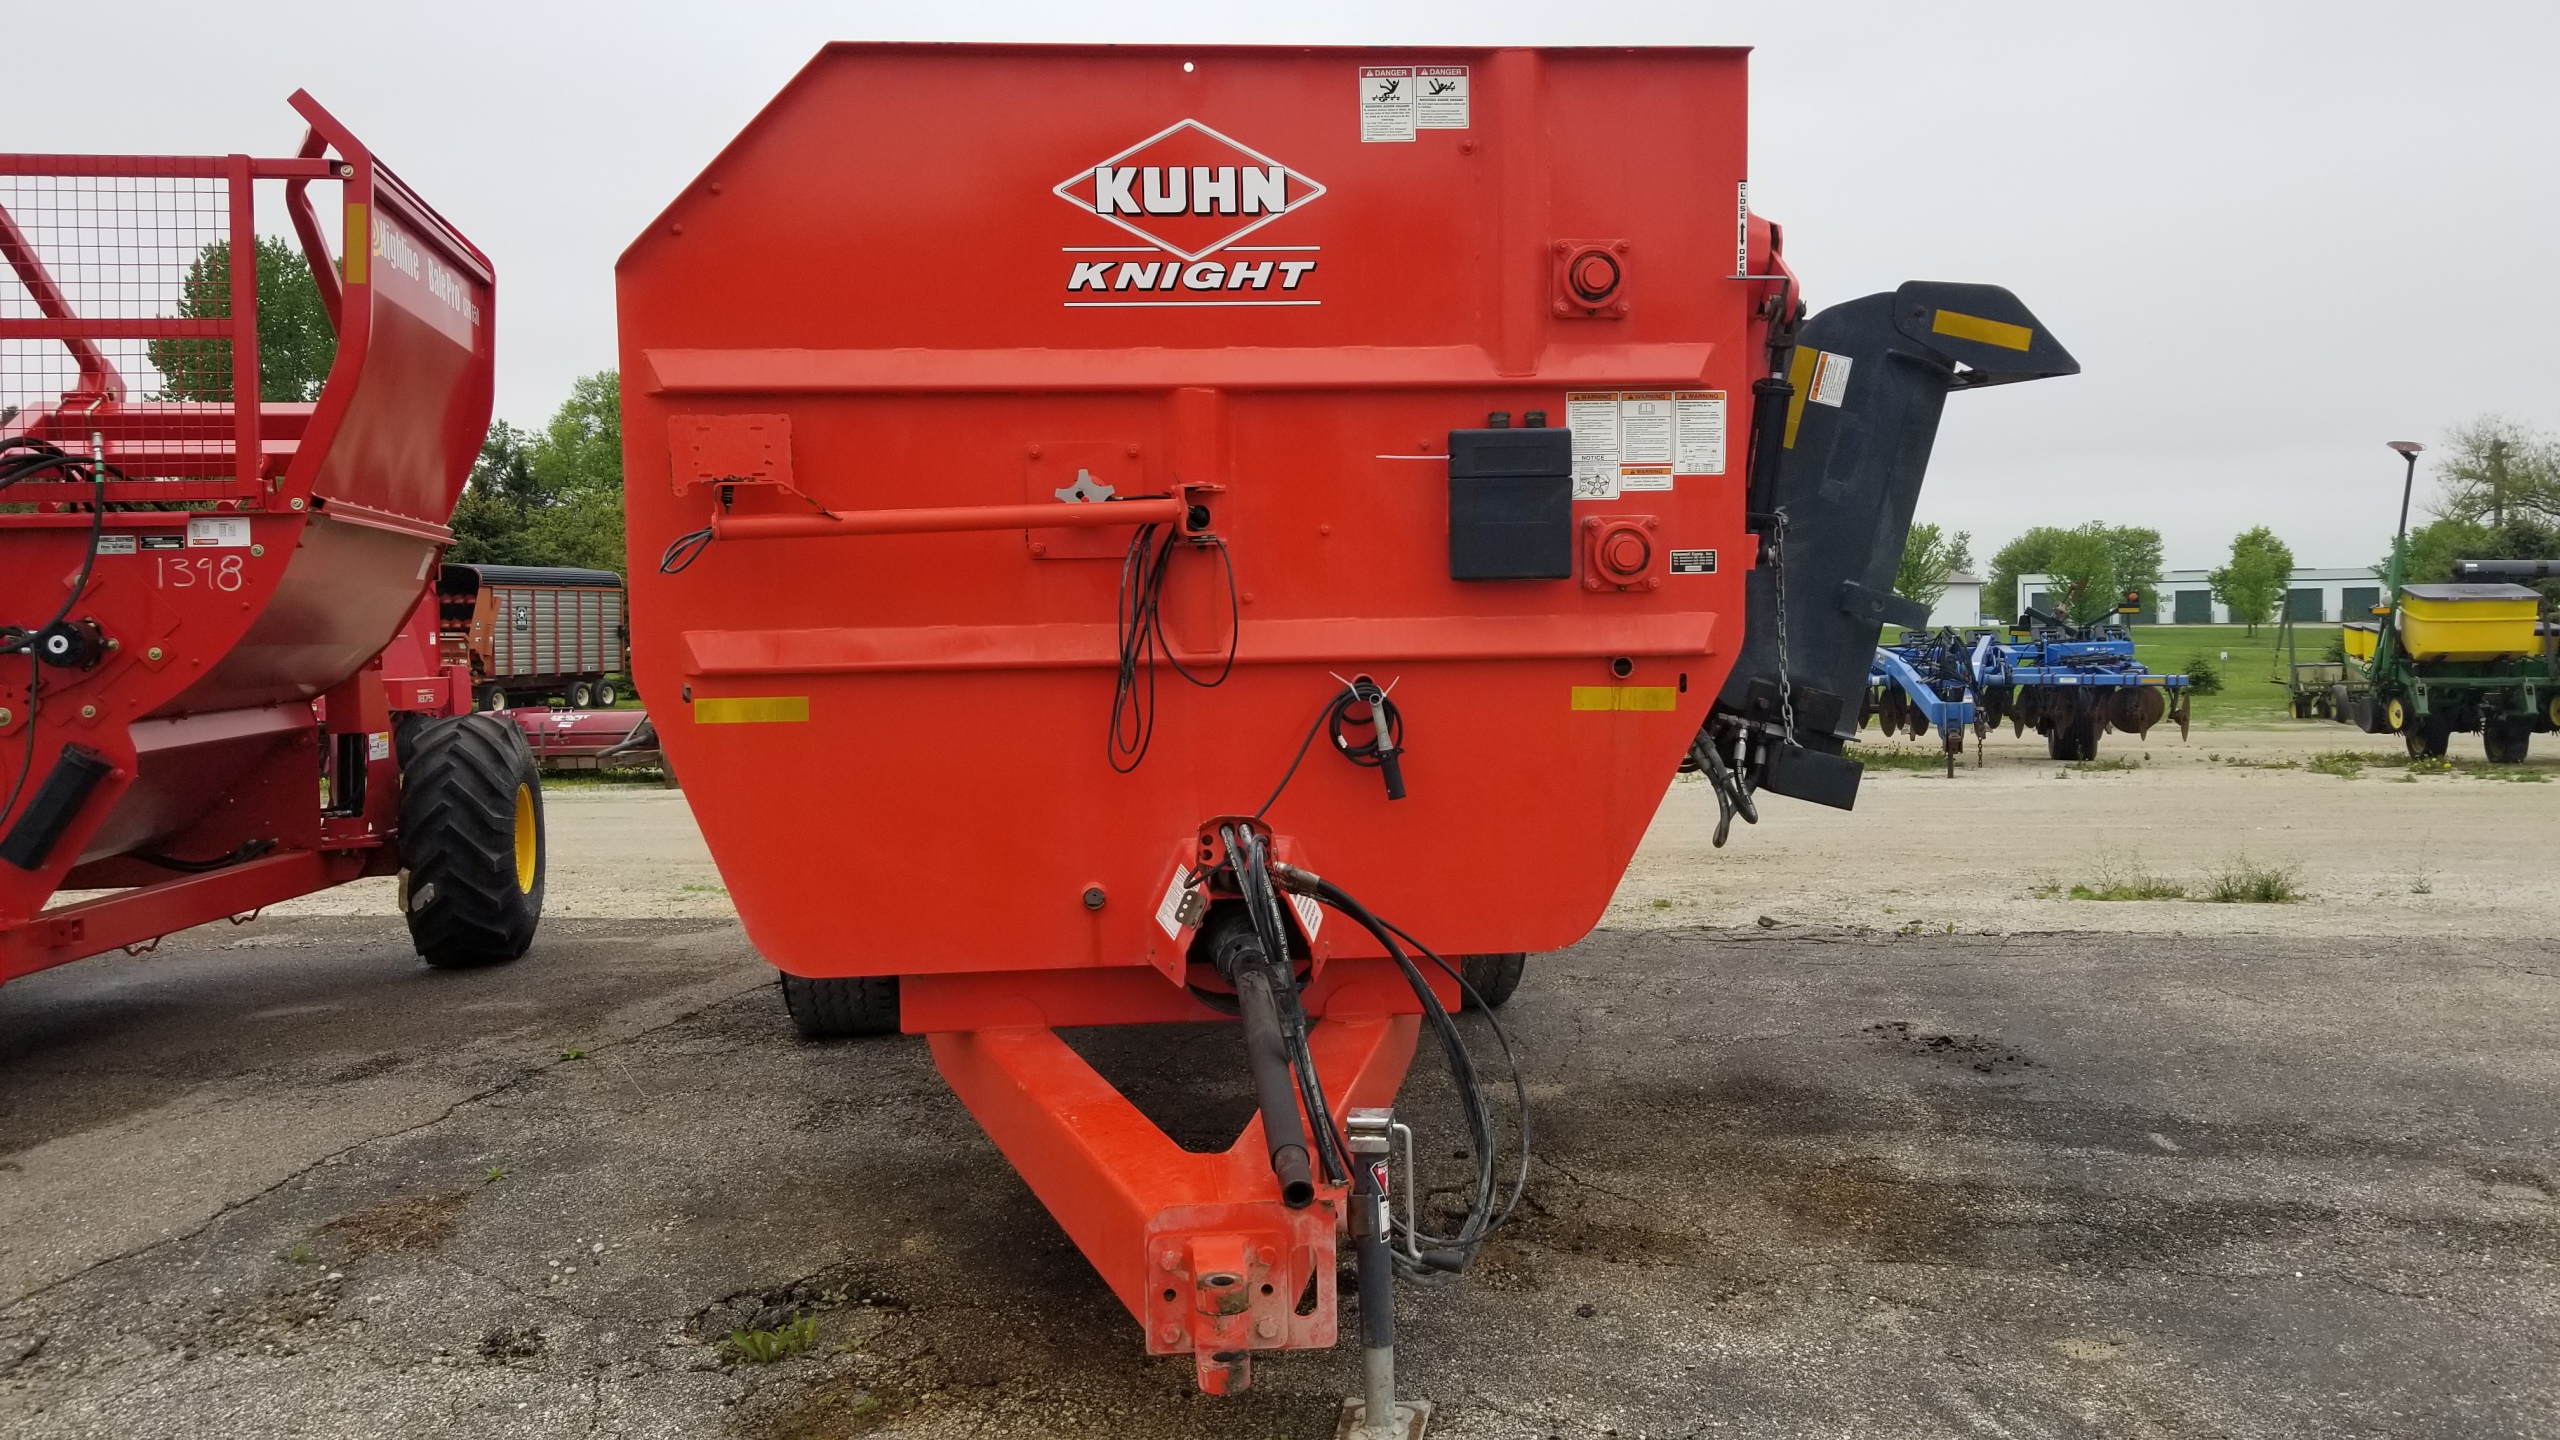 2015 Kuhn Knight RA142 TMR Mixer for sale in Chatfield, MN | IronSearch